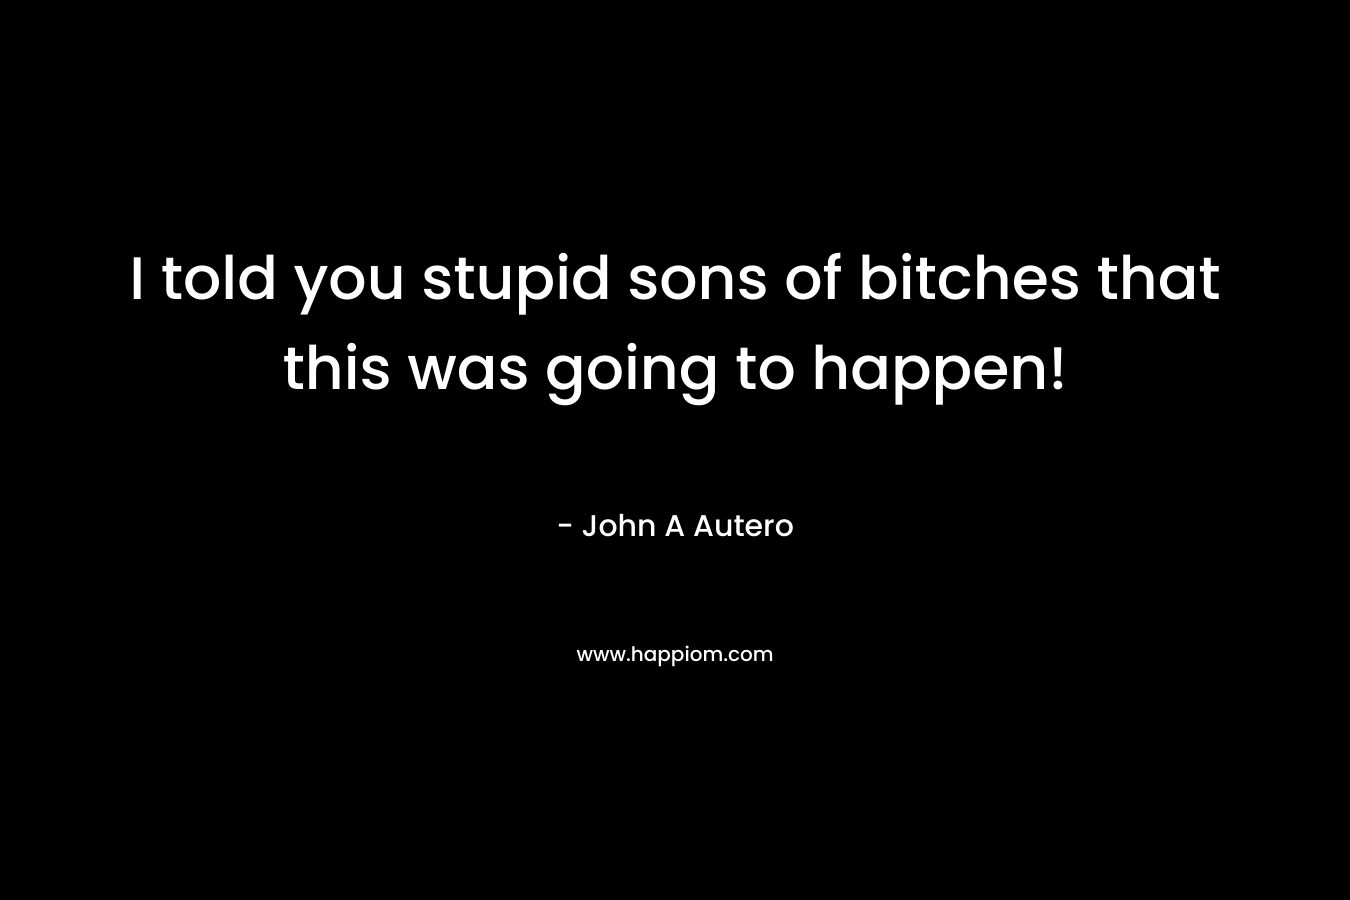 I told you stupid sons of bitches that this was going to happen! – John A Autero